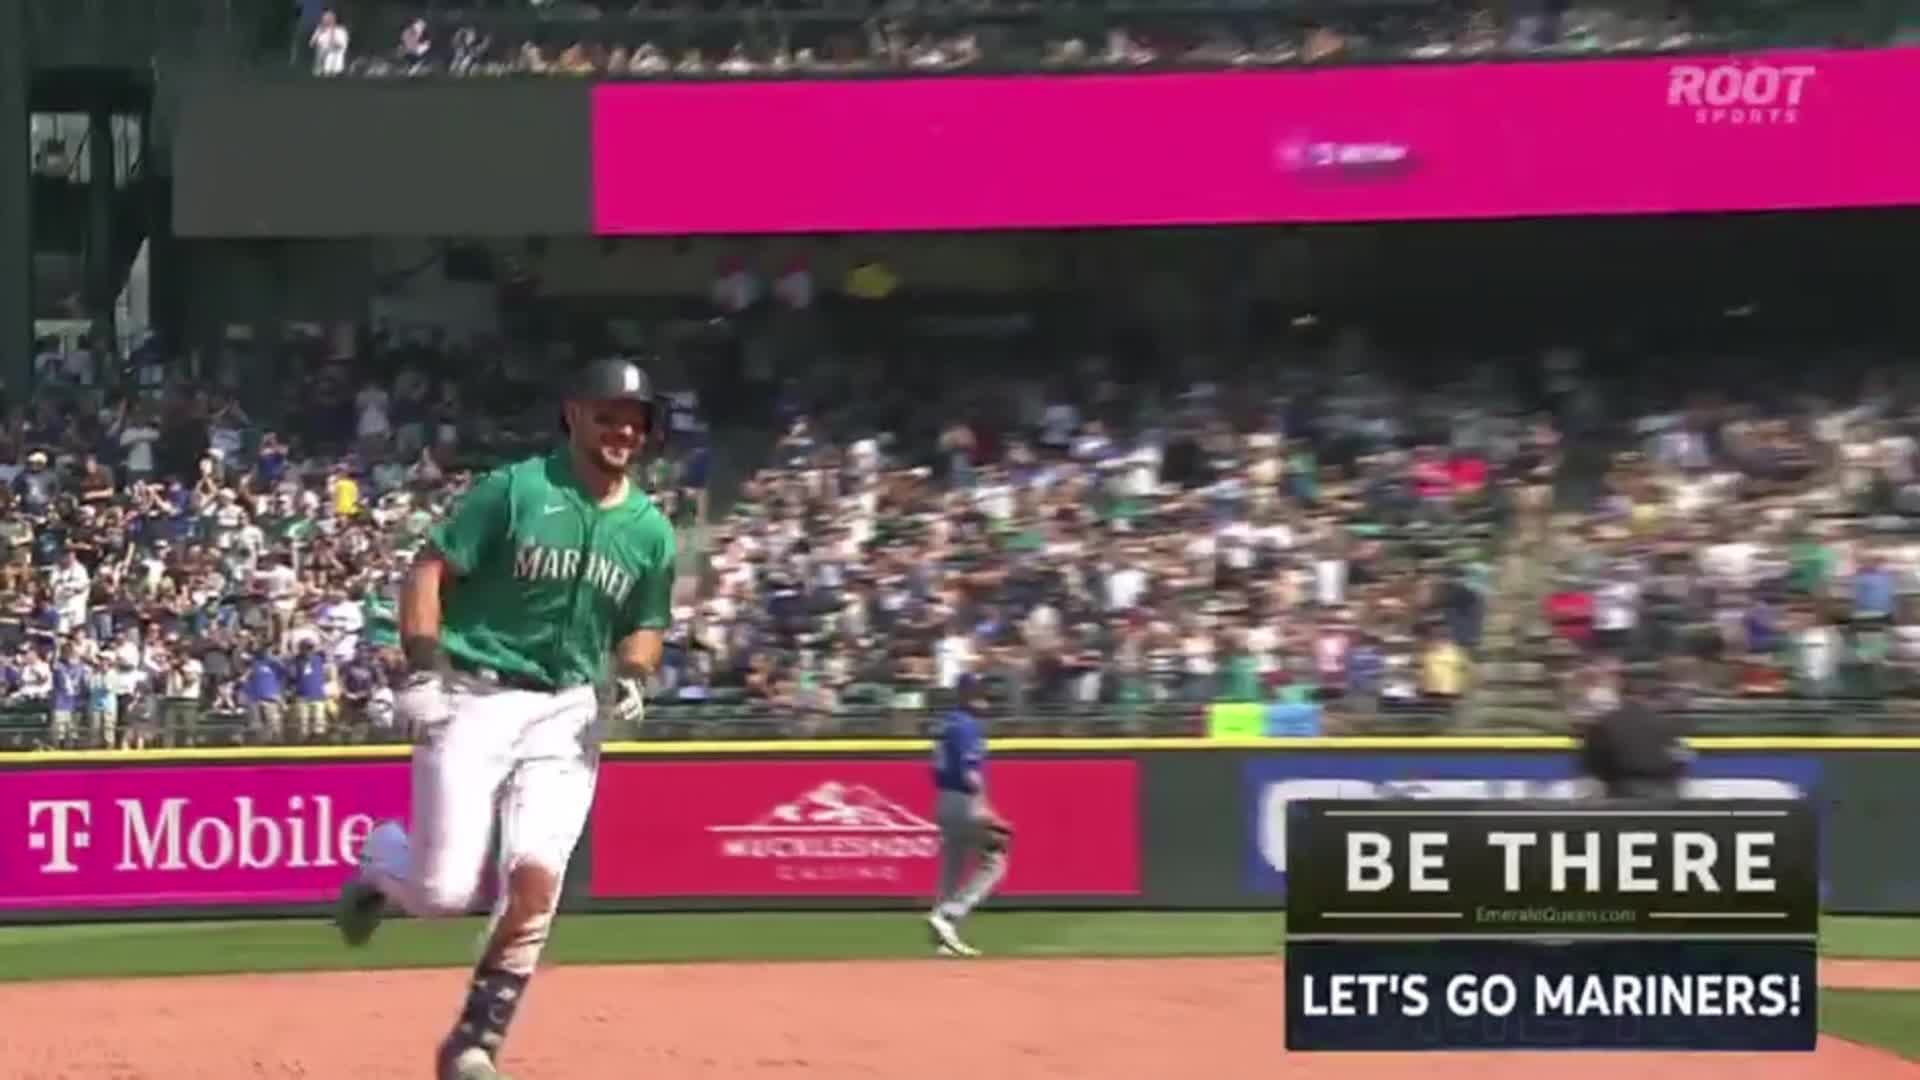 Big Dumper has righty power for his 25th HR : r/Mariners